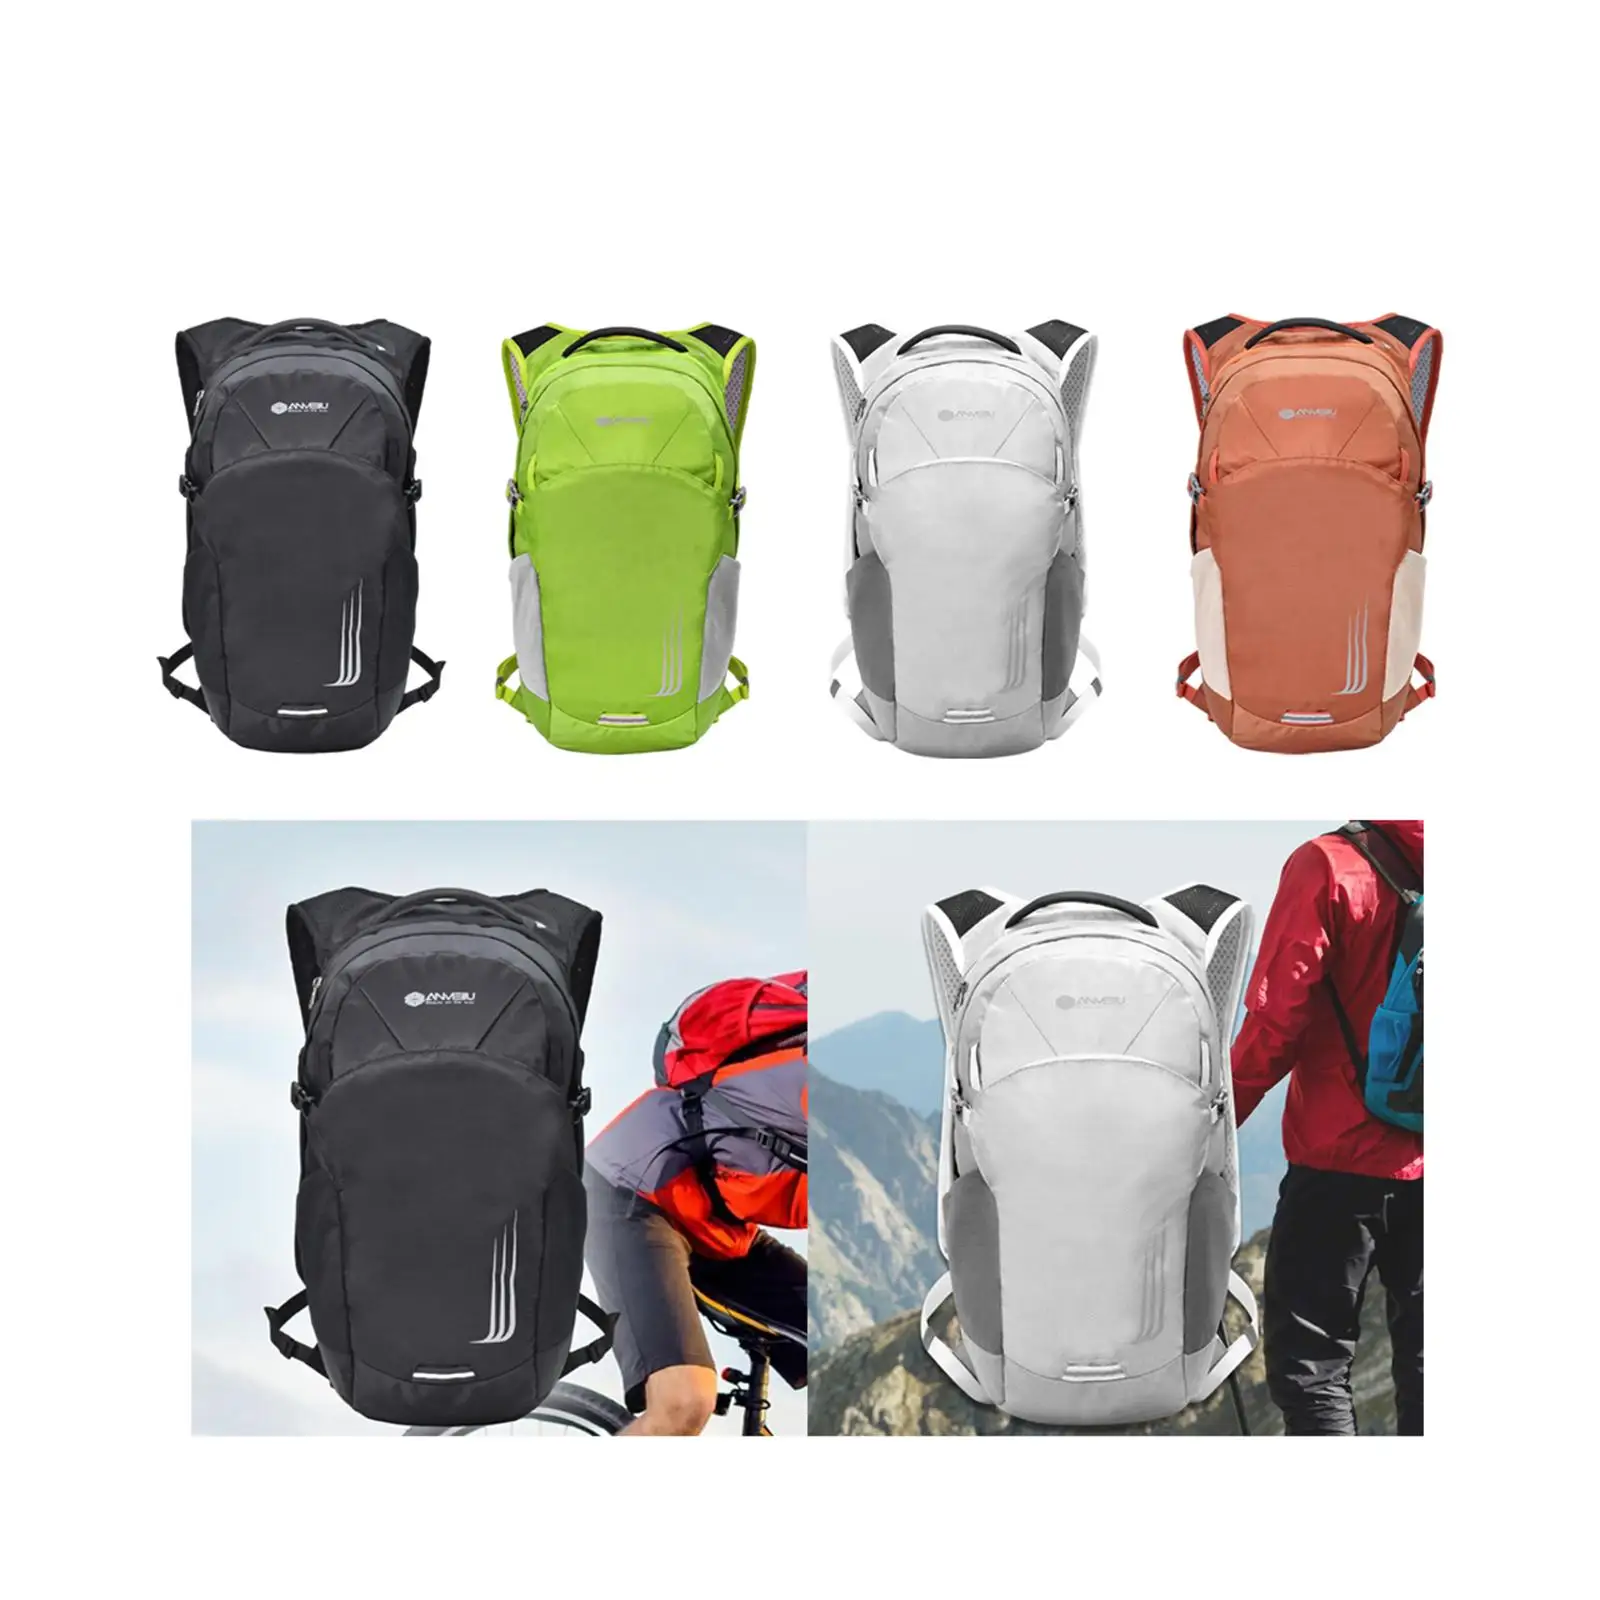 Hydration Backpack Adjustable Lightweight Water Bag Portable Water Storage Bag for Climbing Cycling Camping Biking Riding